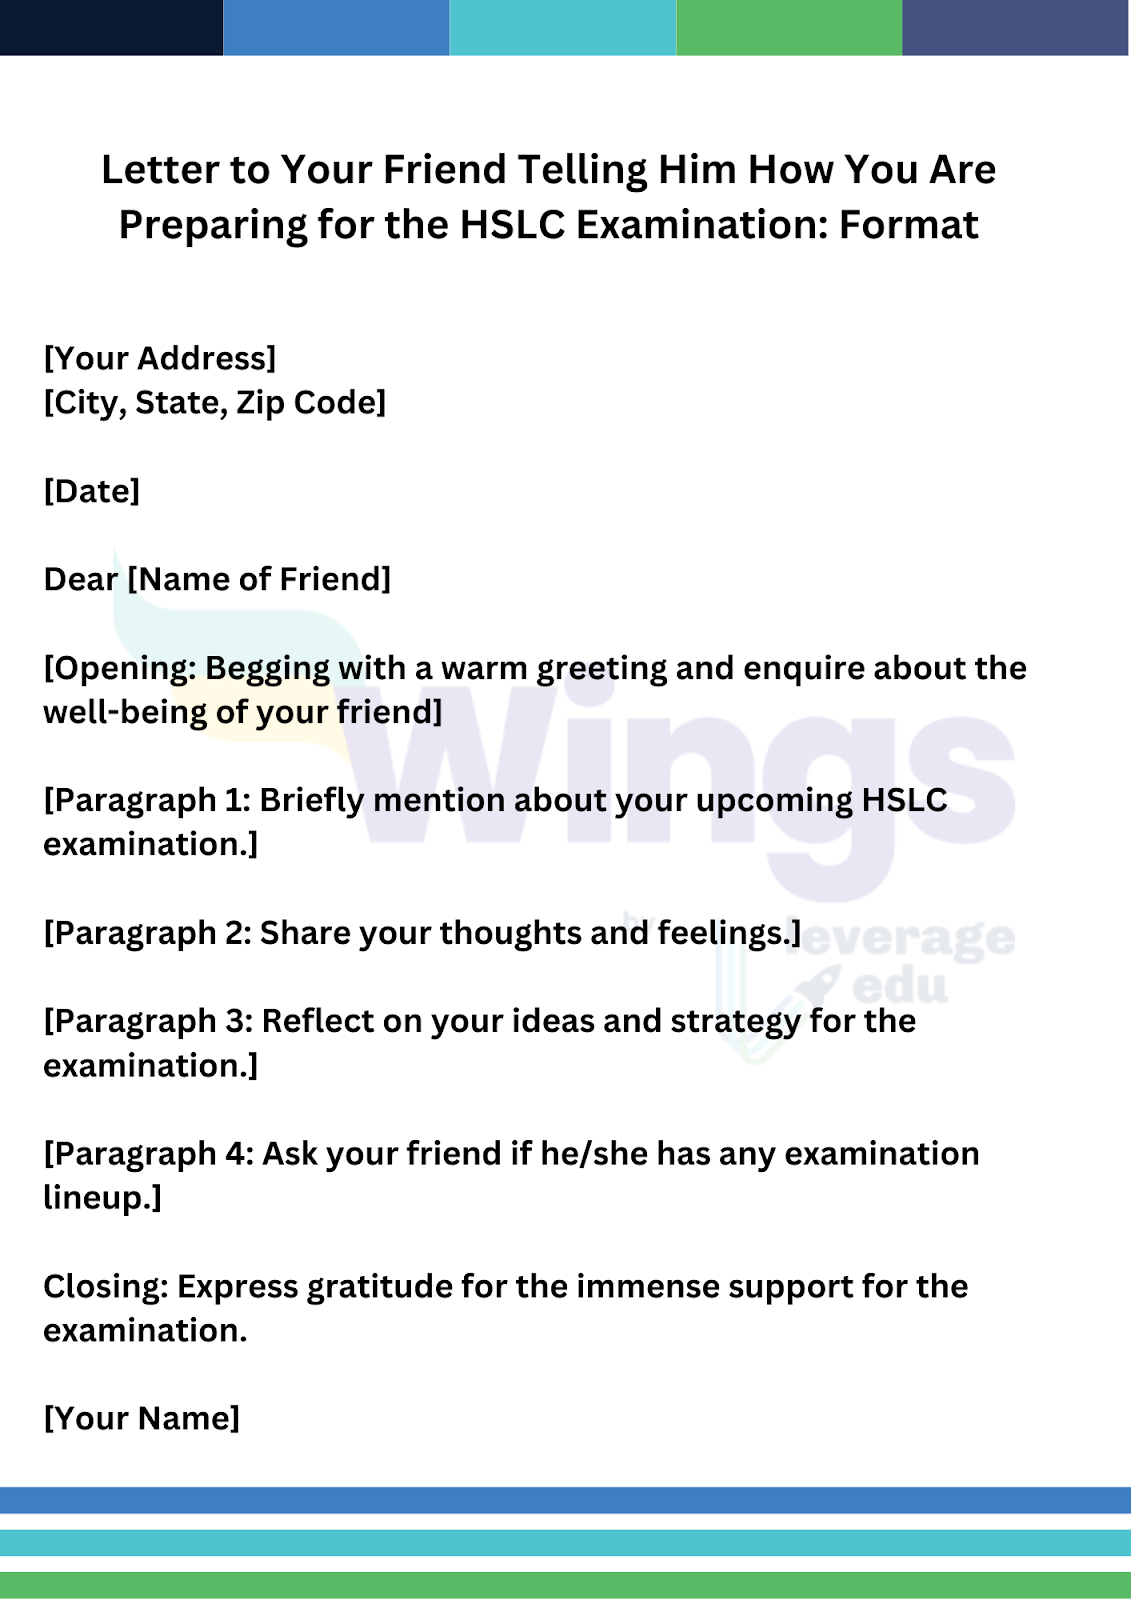 Letter to Your Friend Telling Him How You Are Preparing for the HSLC Examination